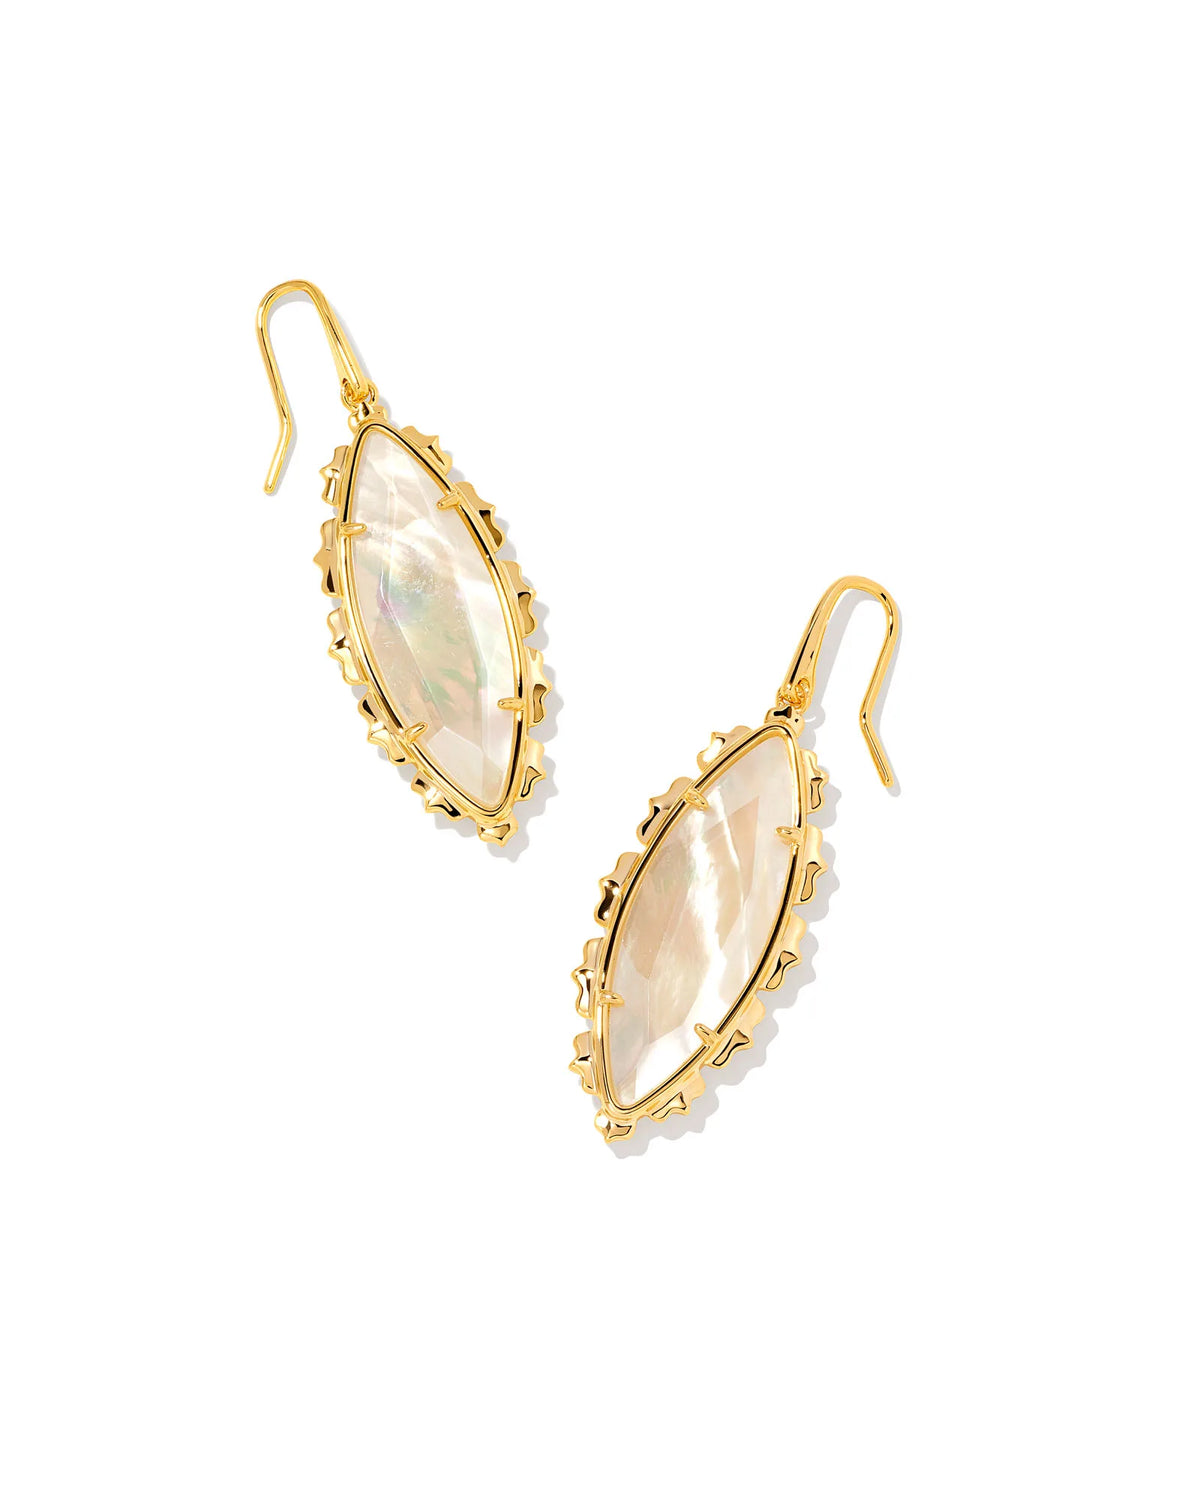 Genevieve Gold Drop Earrings in Ivory Mother-of-Pearl